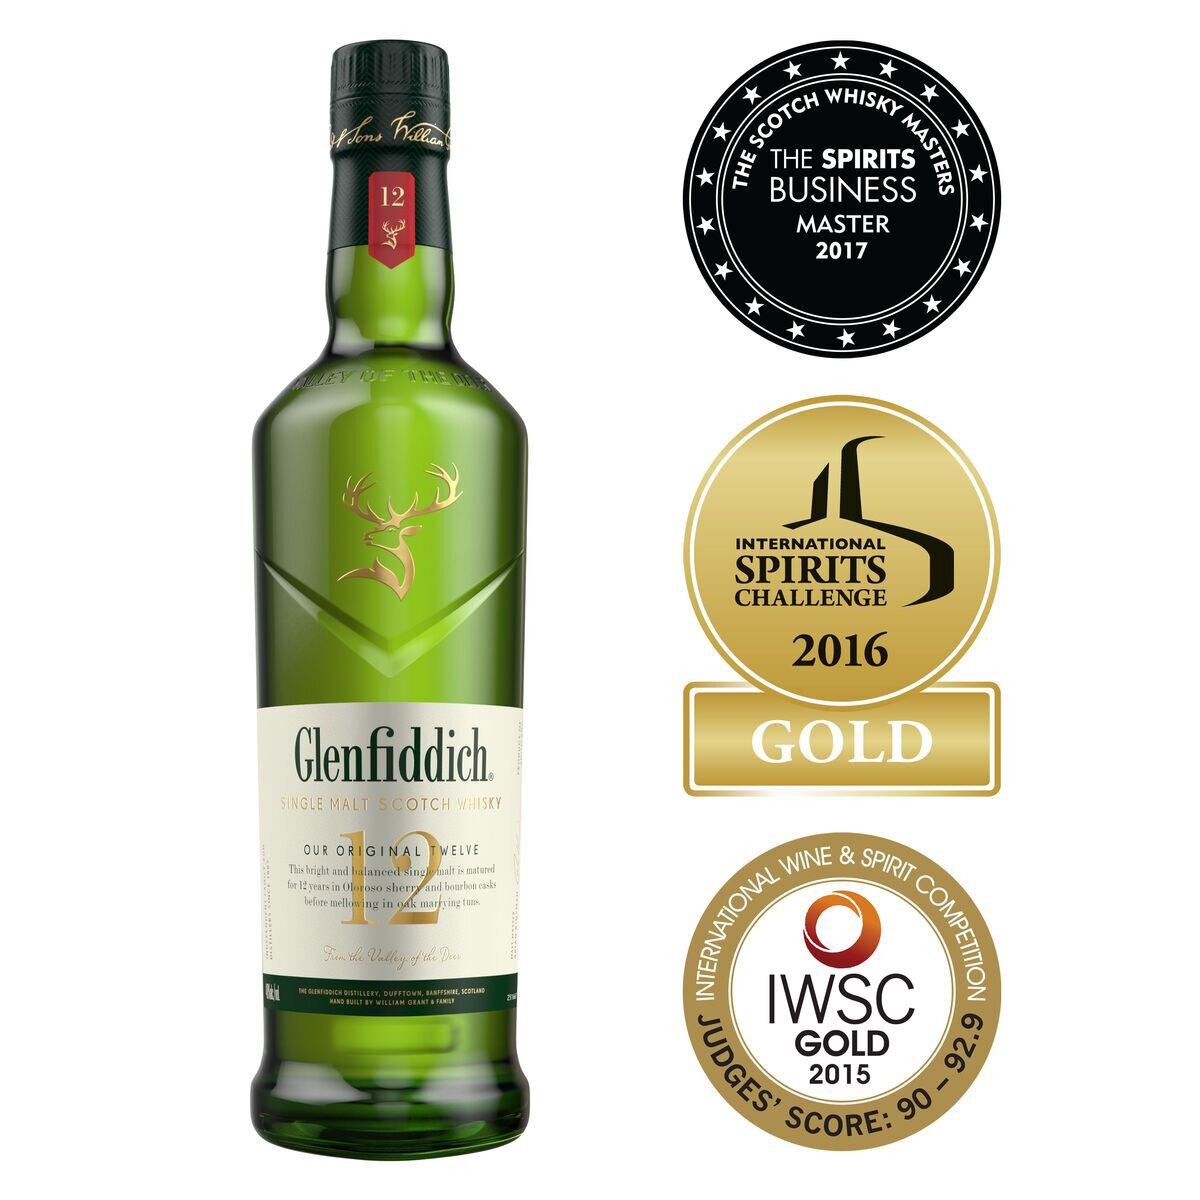 Cut out image of Glenfiddich bottle on white background with awards